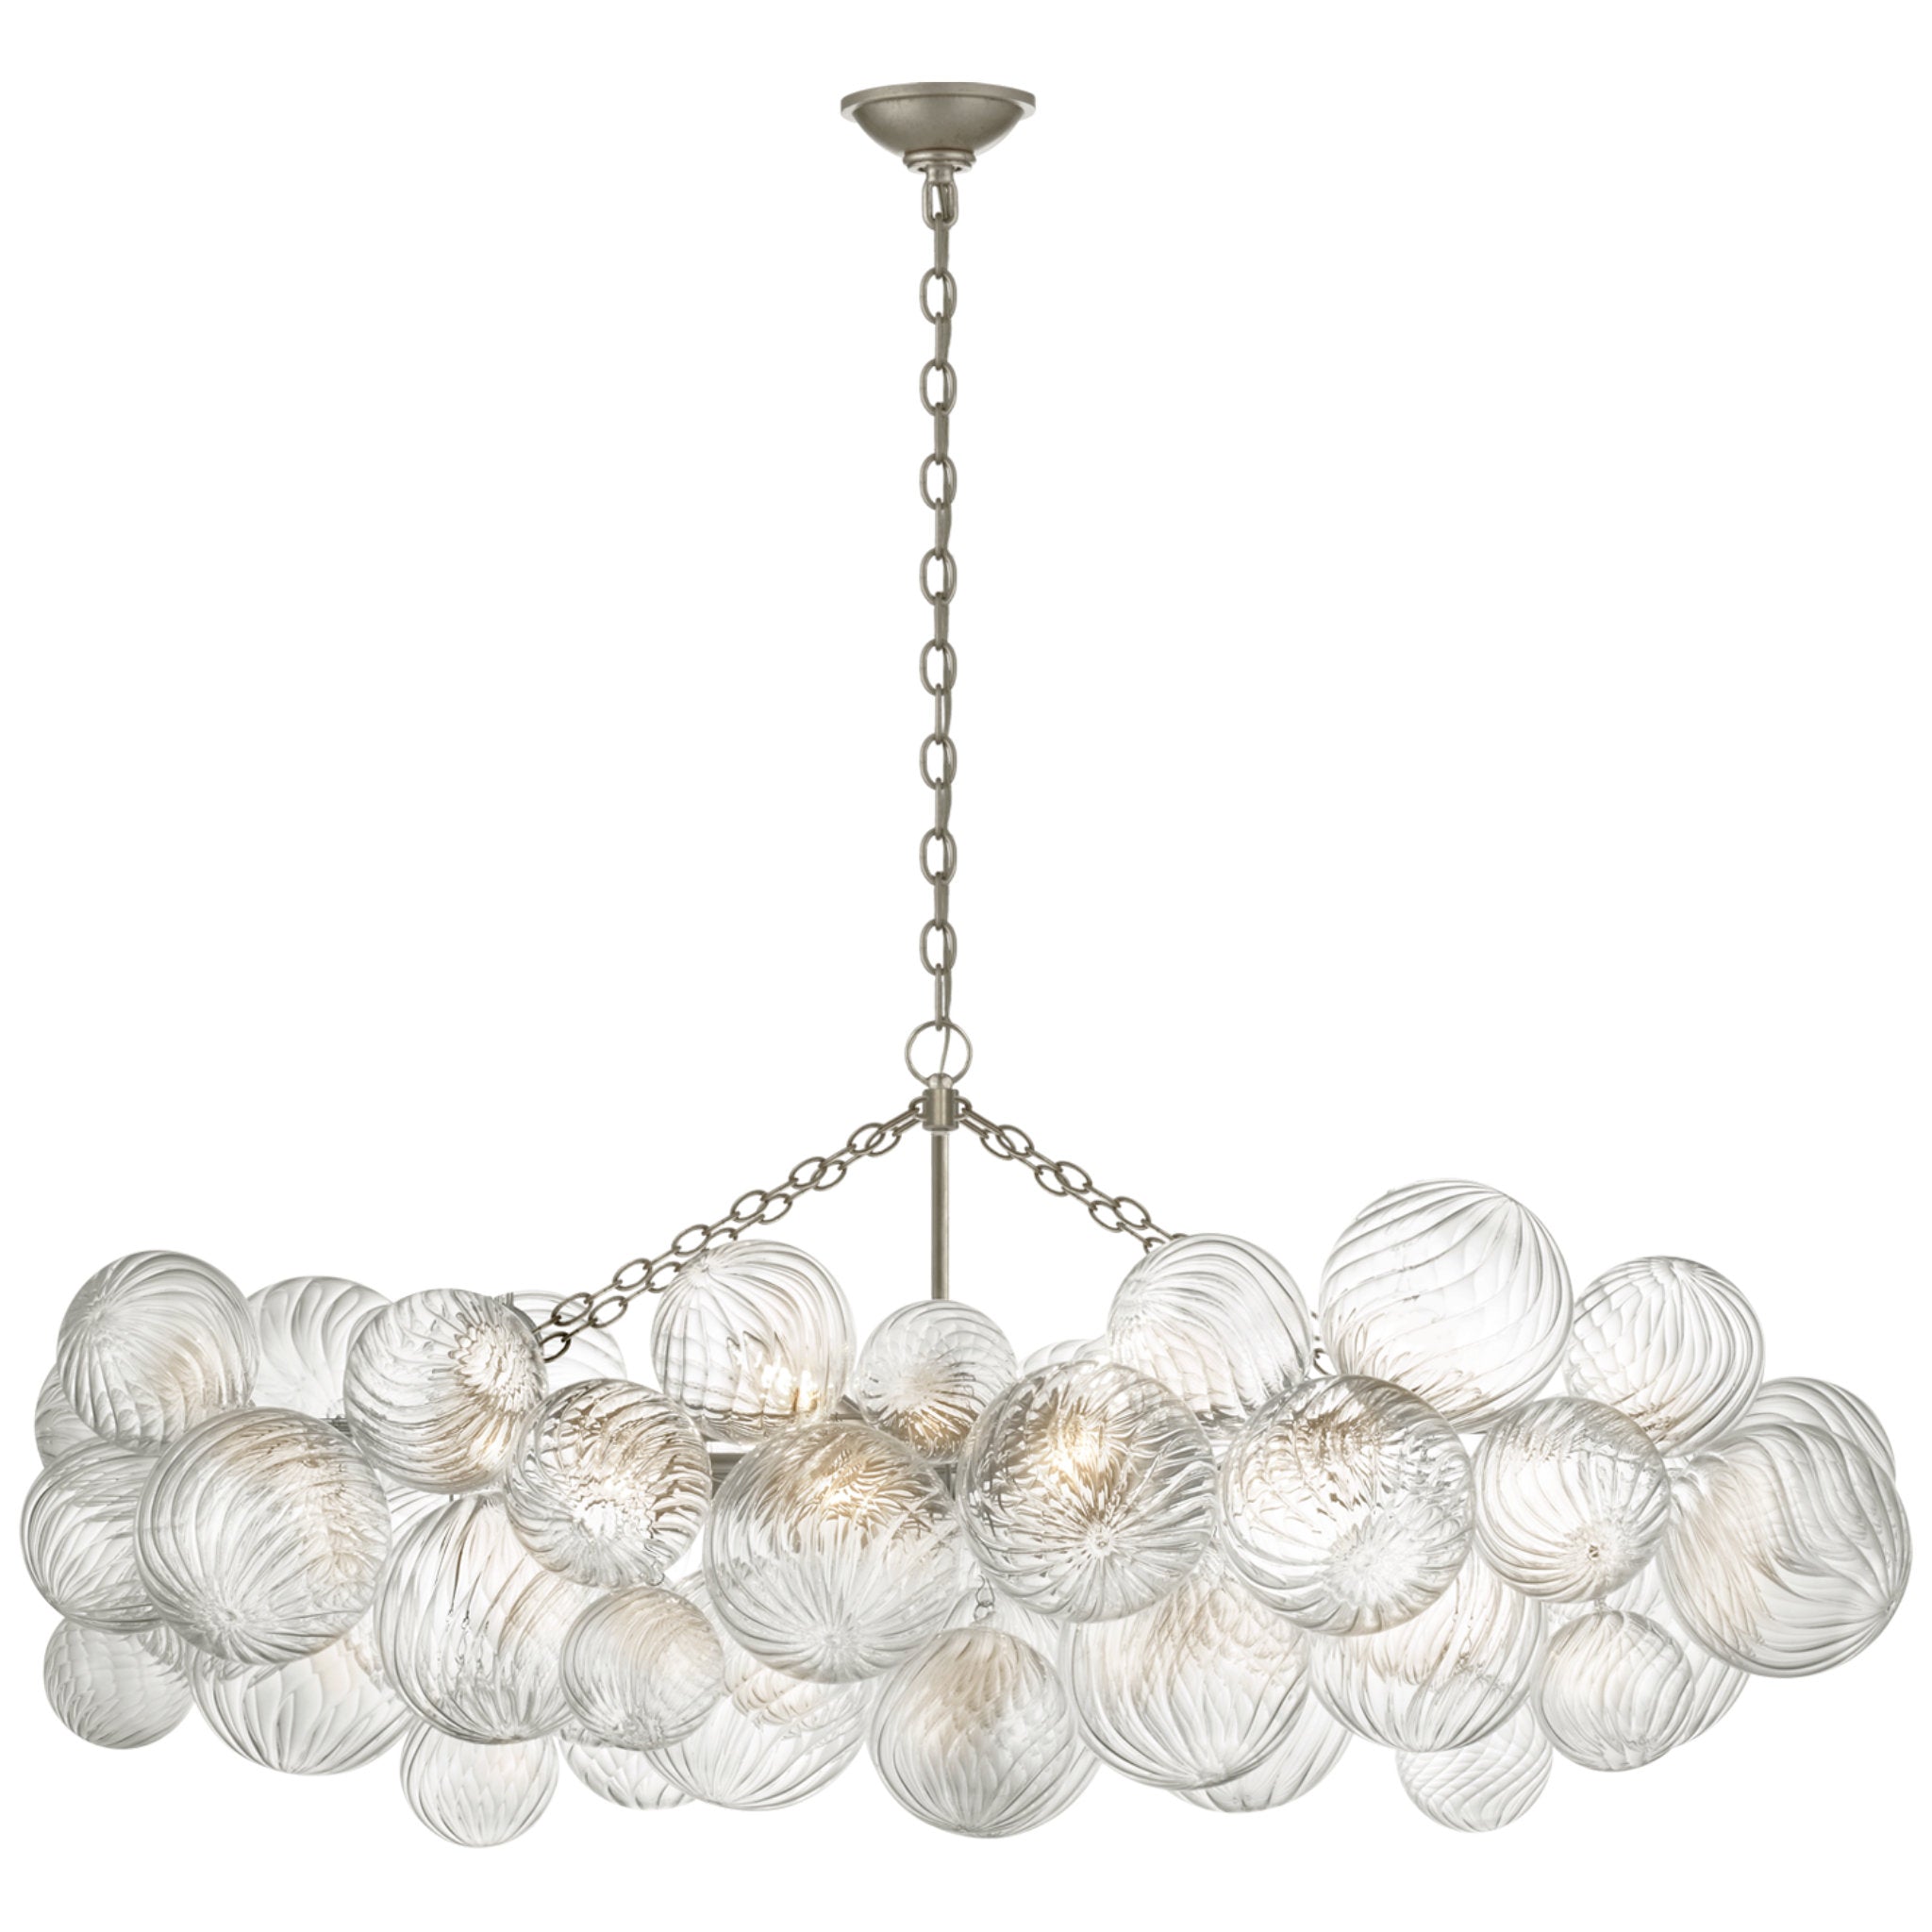 Julie Neill Talia Medium Linear Chandelier in Burnished Silver Leaf with Clear Swirled Glass